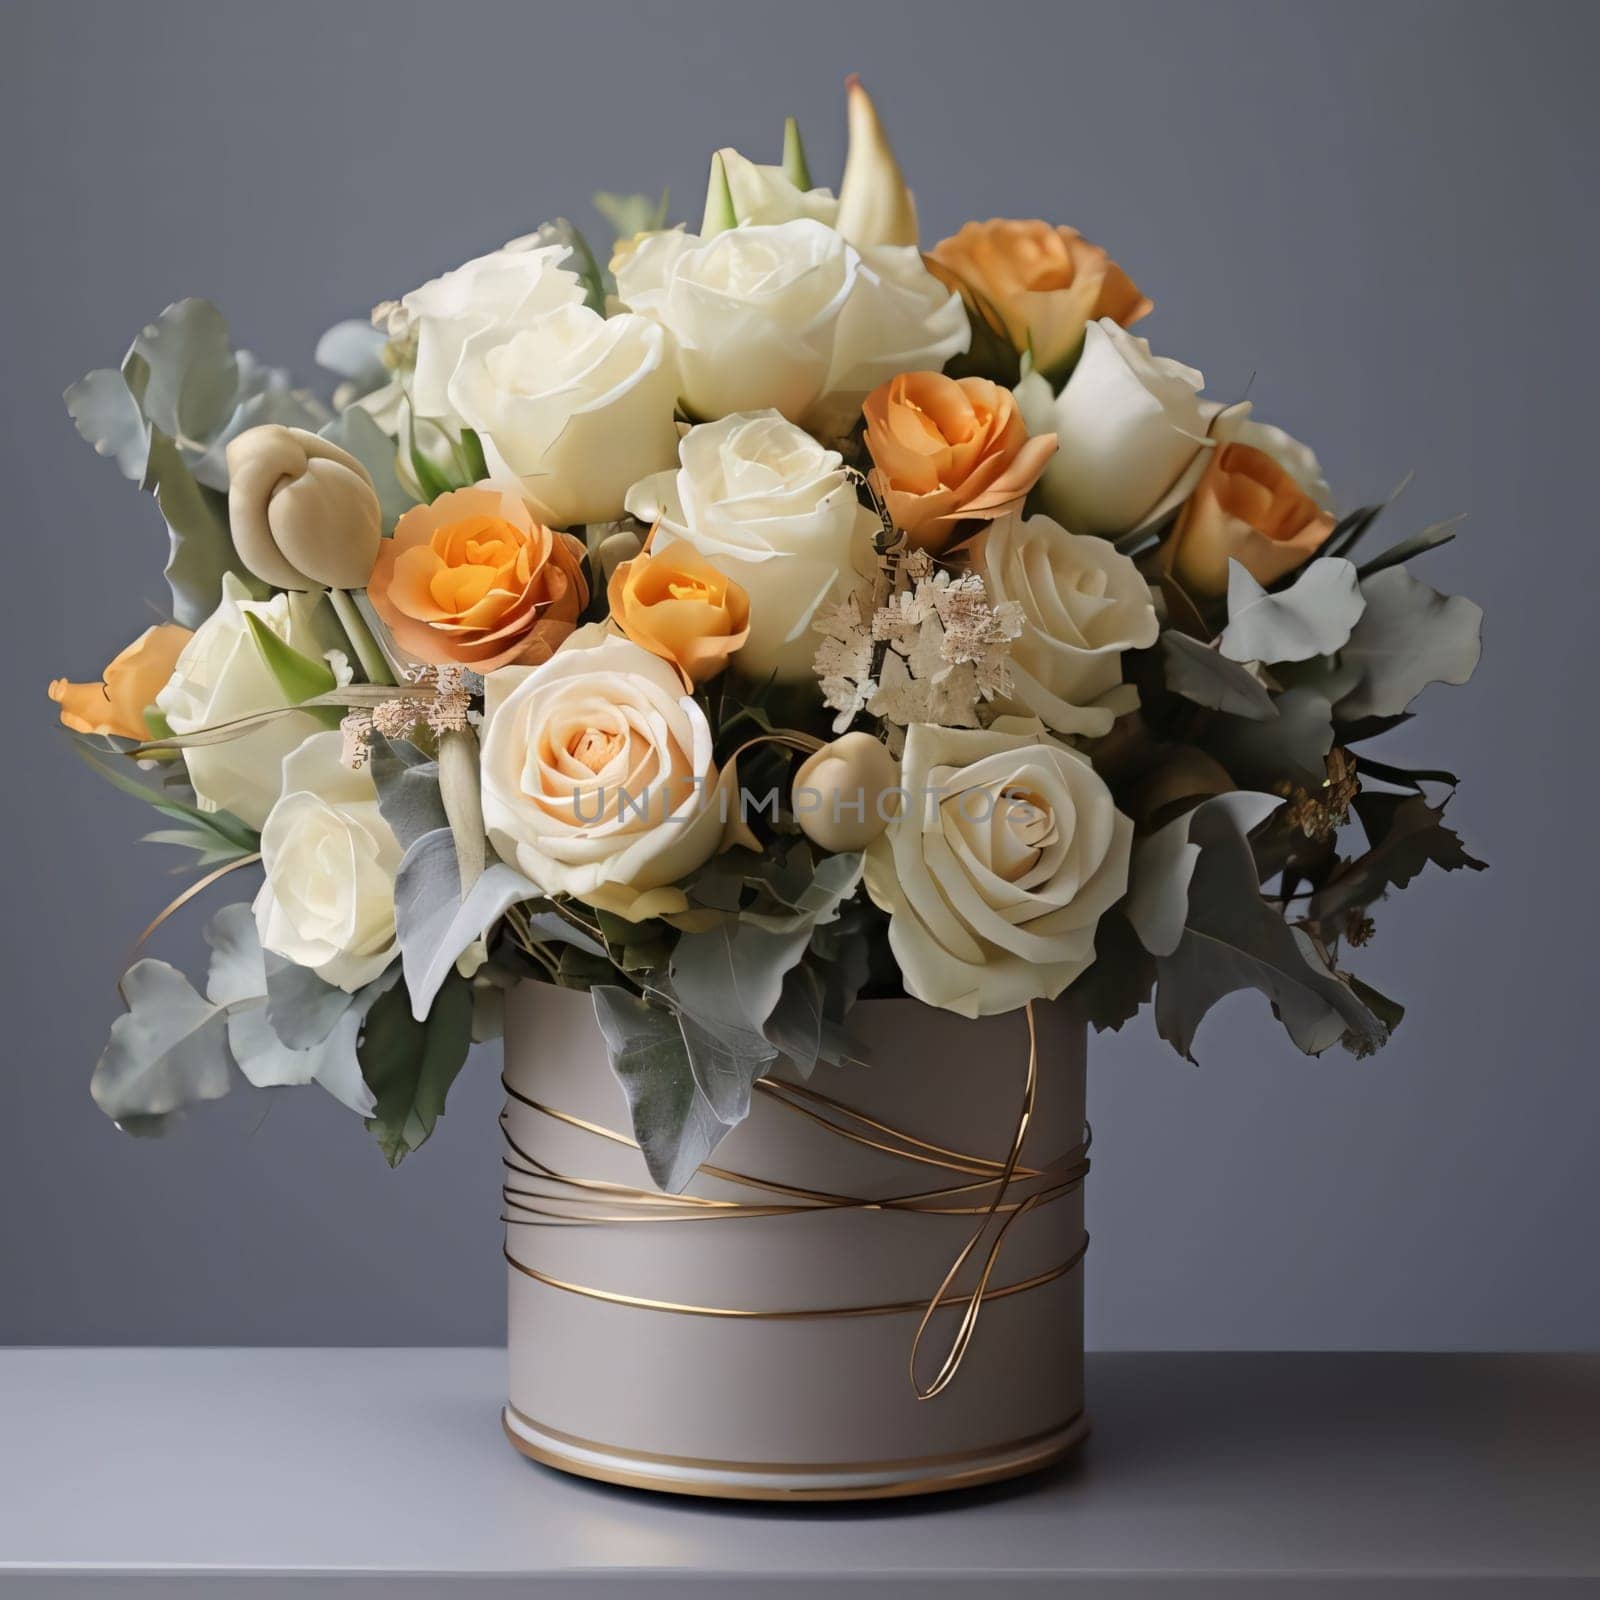 A bouquet of white and orange roses in an ornate gold vase on a gray background. Flowering flowers, a symbol of spring, new life. by ThemesS